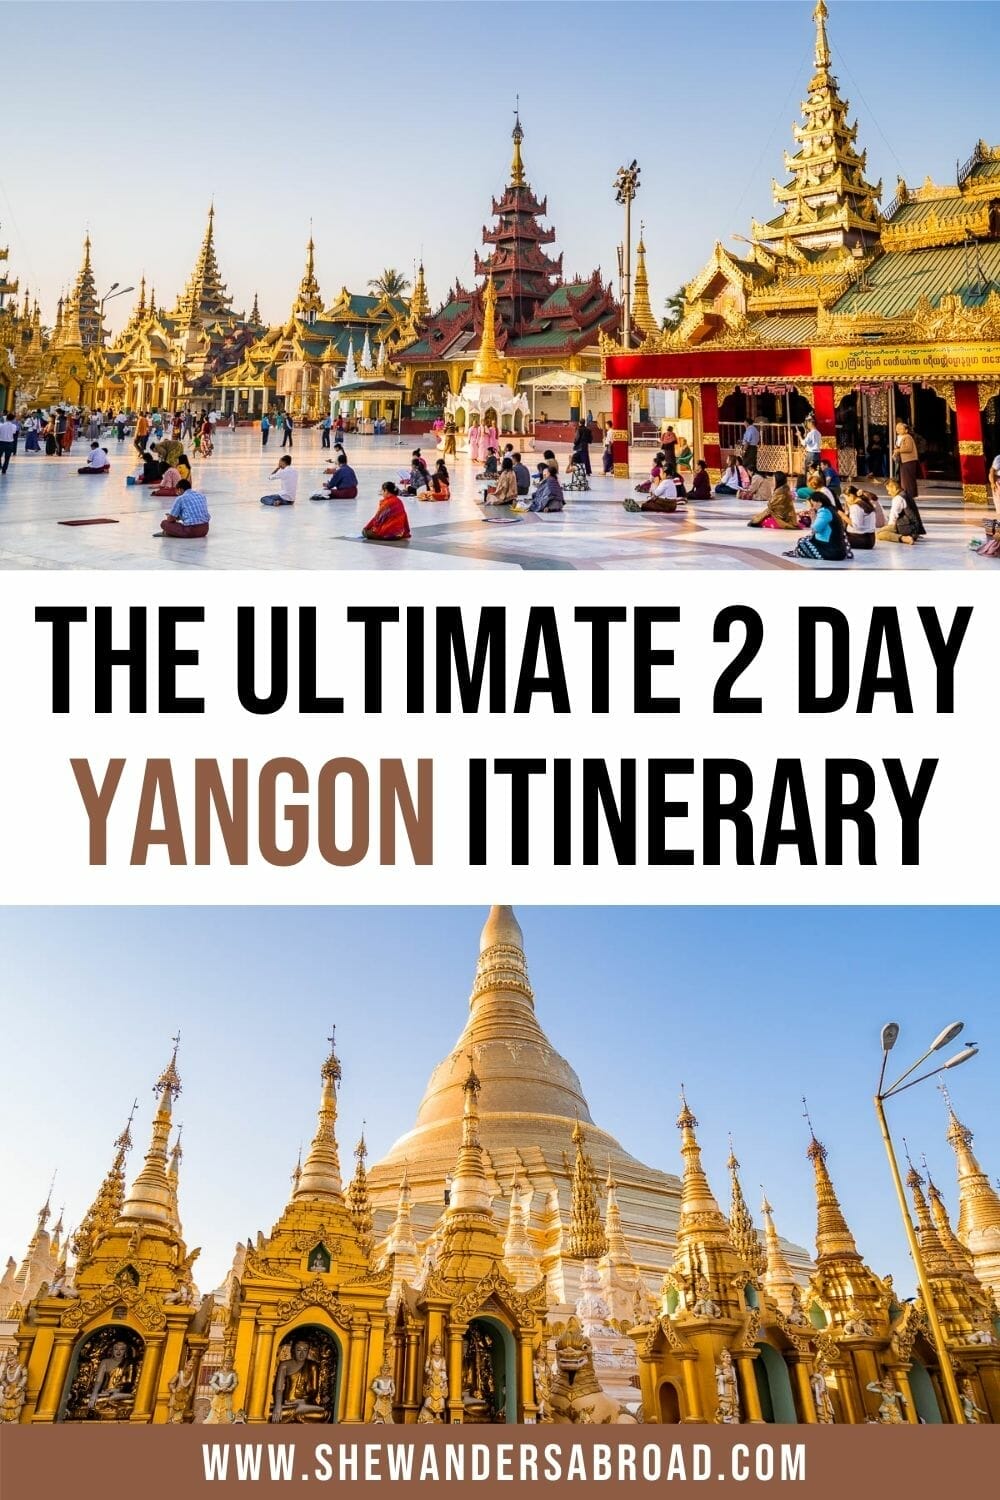 How to Spend 2 Days in Yangon: The Perfect Yangon Itinerary